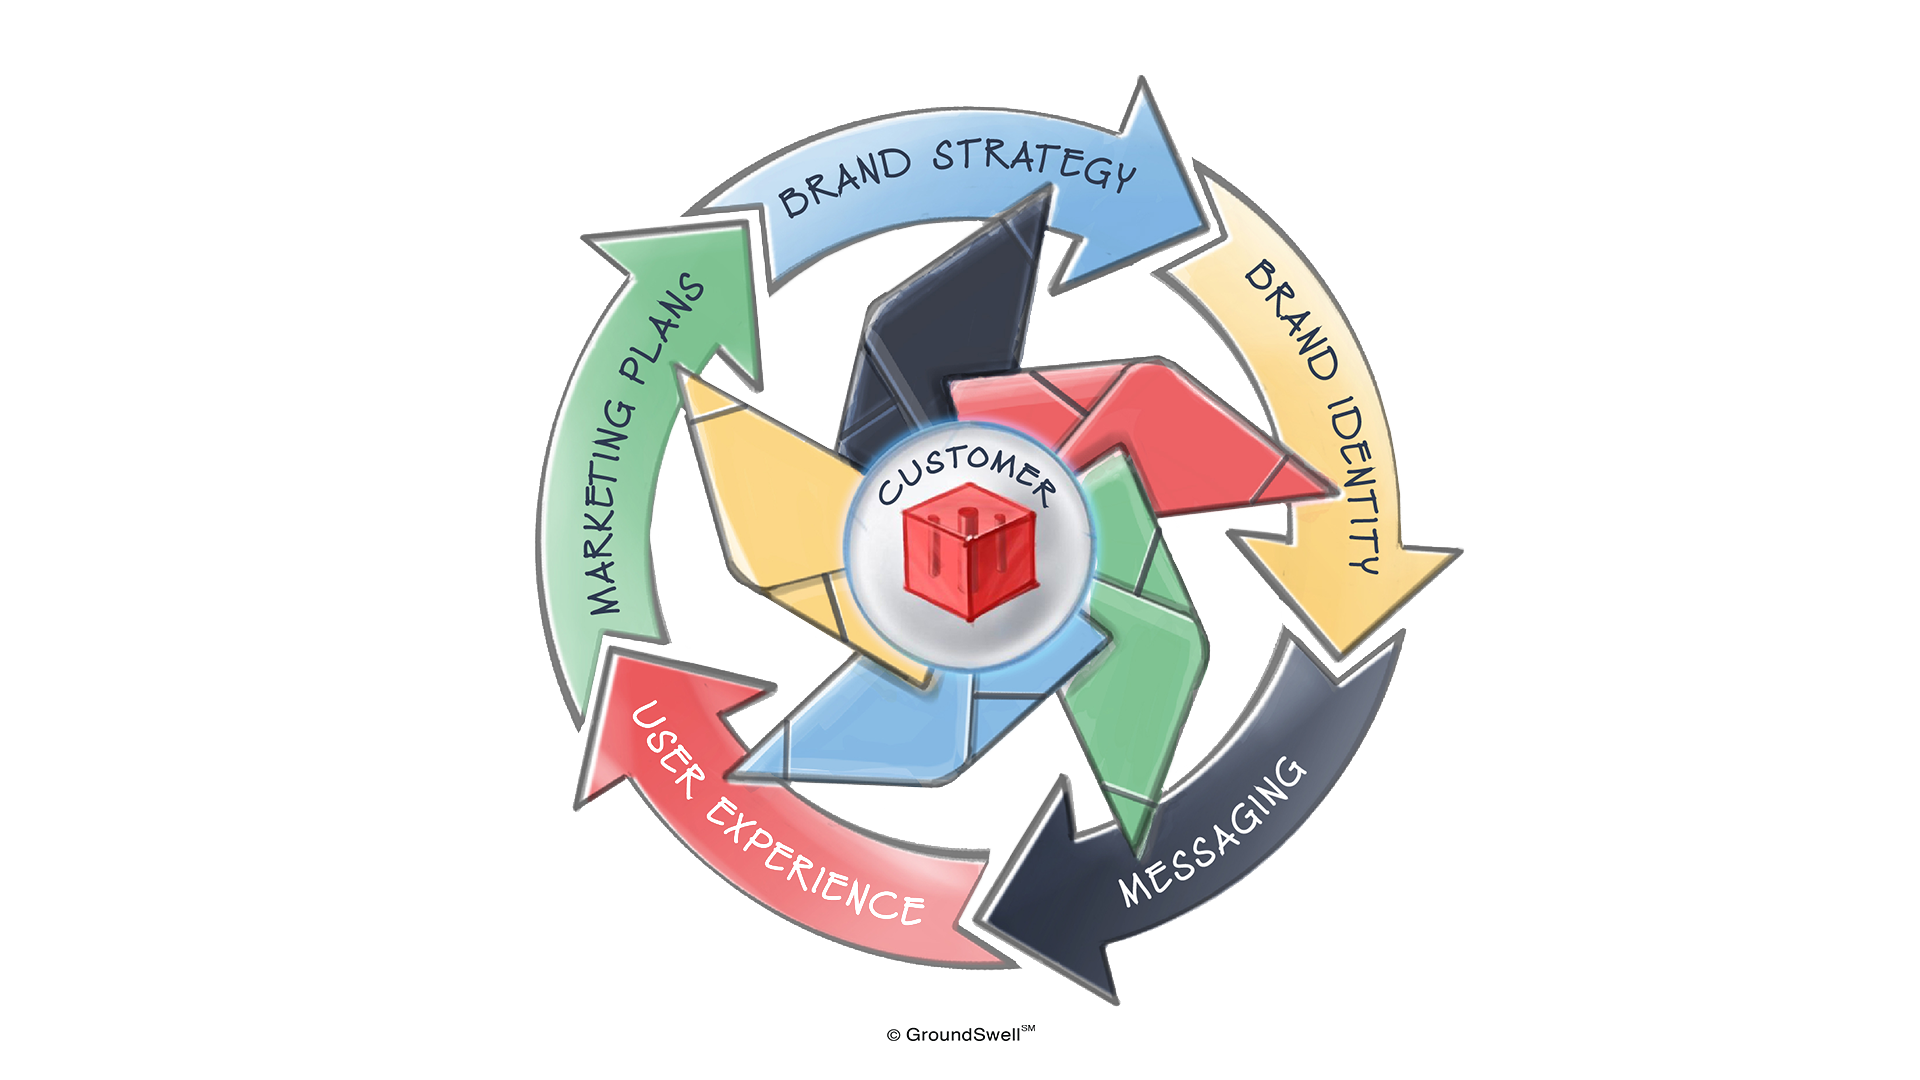 A branding flywheel with a fractal inside of it along with a red cube in the center that highlights six key components to developing a brand and marketing strategy